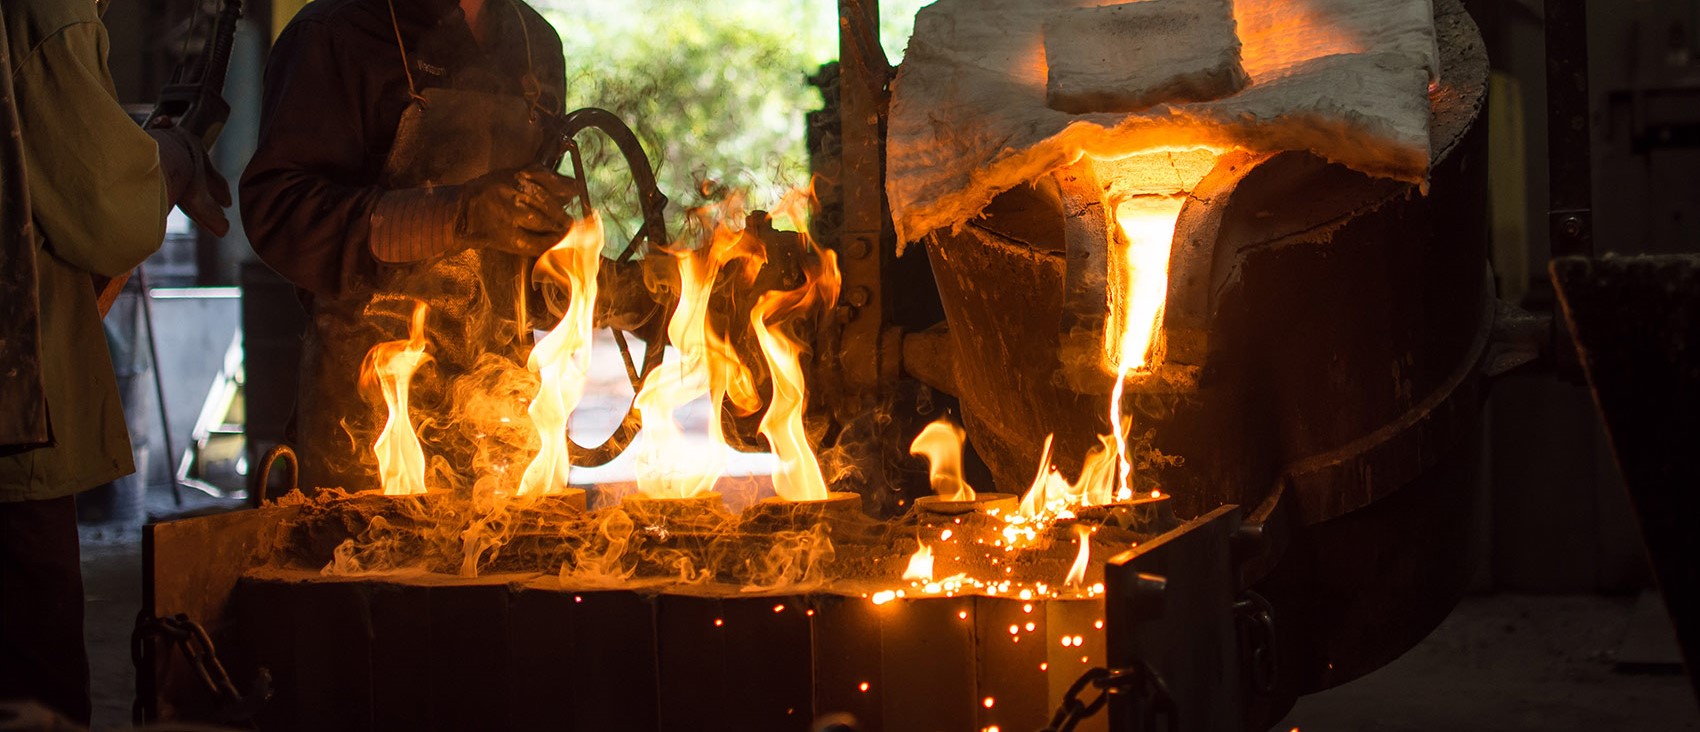 pouring molten metal fire